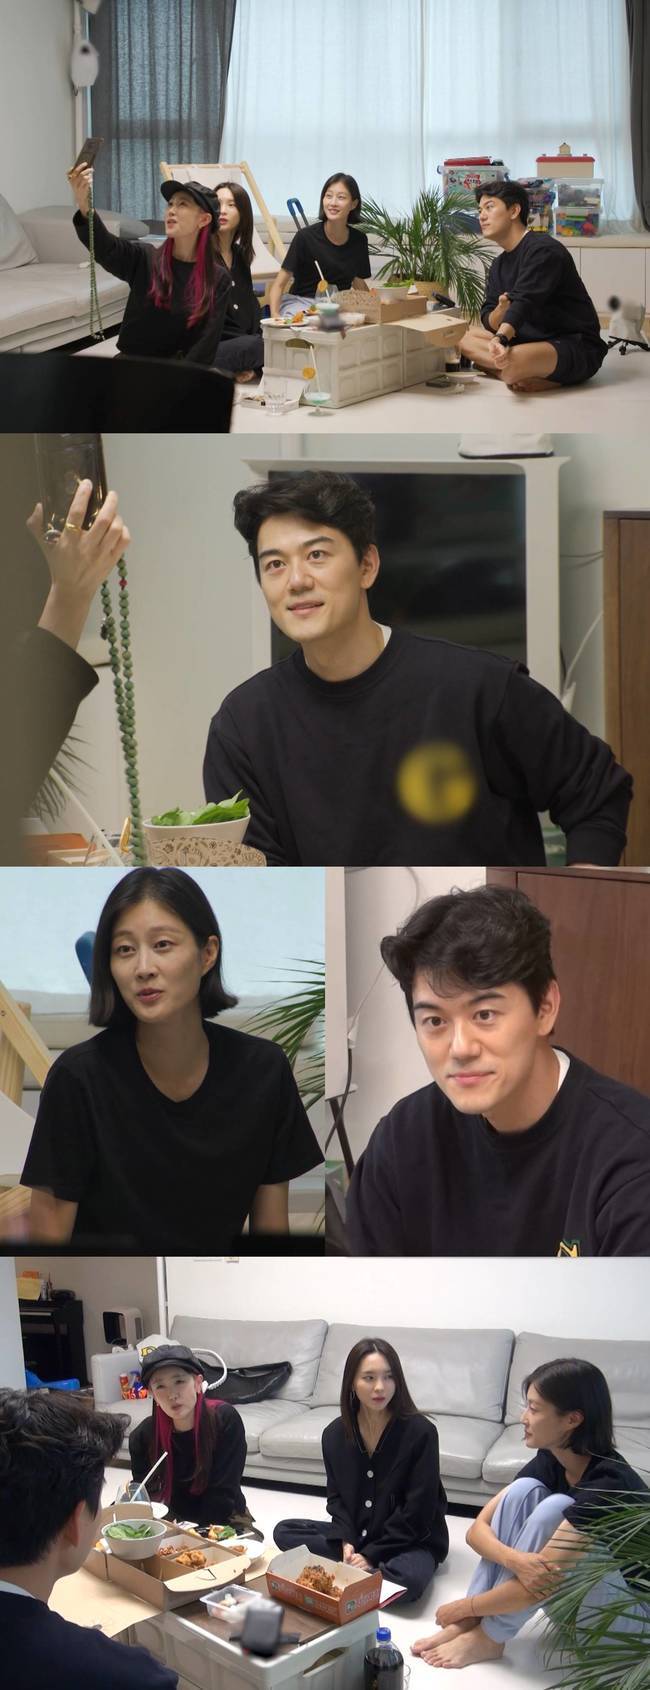 Hong Seong-gi reveals her wistful past for Haha.On SBSs Same Bed, Different Dreams 2 Season 2 - You Are My Destiny (hereinafter referred to as You Are My Destiny), which airs on October 25, Lee Hyun-yi Husband Hong Seong-gi and Hahas 17-year-old bad performance (?) is disclosed.Recently Lee Hyun-yi invited his best friend star and Kim Soo-mi to his home.Like Lee Hyun-yi, Husband Hong Sung-ki prepared a home visit for the working mom star and Kim Soo-mi who are tired of parenting.Hong Sung-ki showed a kind Husband aspect by treating food directly.However, the warm atmosphere was also a bit, and Hong Sung-ki said, I met Haha 17 years ago and I was sad for Haha.So the star contacted Haha and said, The girl made a big mistake.Meanwhile, the stars and Kim Soo-mi staged a Disclosure war against Husband, a no-filter back-to-back conversation about their Husbands, Haha and Gaco (?), and the couples boredom, were surprised by the Confessions.Lee Hyun-yi and Hong Sung-ki also had a previous-class incident that had not been good for two years.At that time, Hong Seong-gi confided in me that he didnt even want to hear his wifes footsteps.Lee Hyun-yi was embarrassed by those who said, I want to be born when asked if I would marry Husband now in the next life.Lee Hyun-yi, Hong Sung-kis previous-class case will be released on the air.Lee Hyun-yis model look, which Kim Soo-mi also coveted, was released.The clothes of Lee Hyun-yi closet, which seemed to burst at any moment, were distributed to the best star, Kim Soo-mi. The clothes that were released varied from luxury to colorful dresses.Lee Hyun-yi smiled with a smile as he visited his owner one by one.